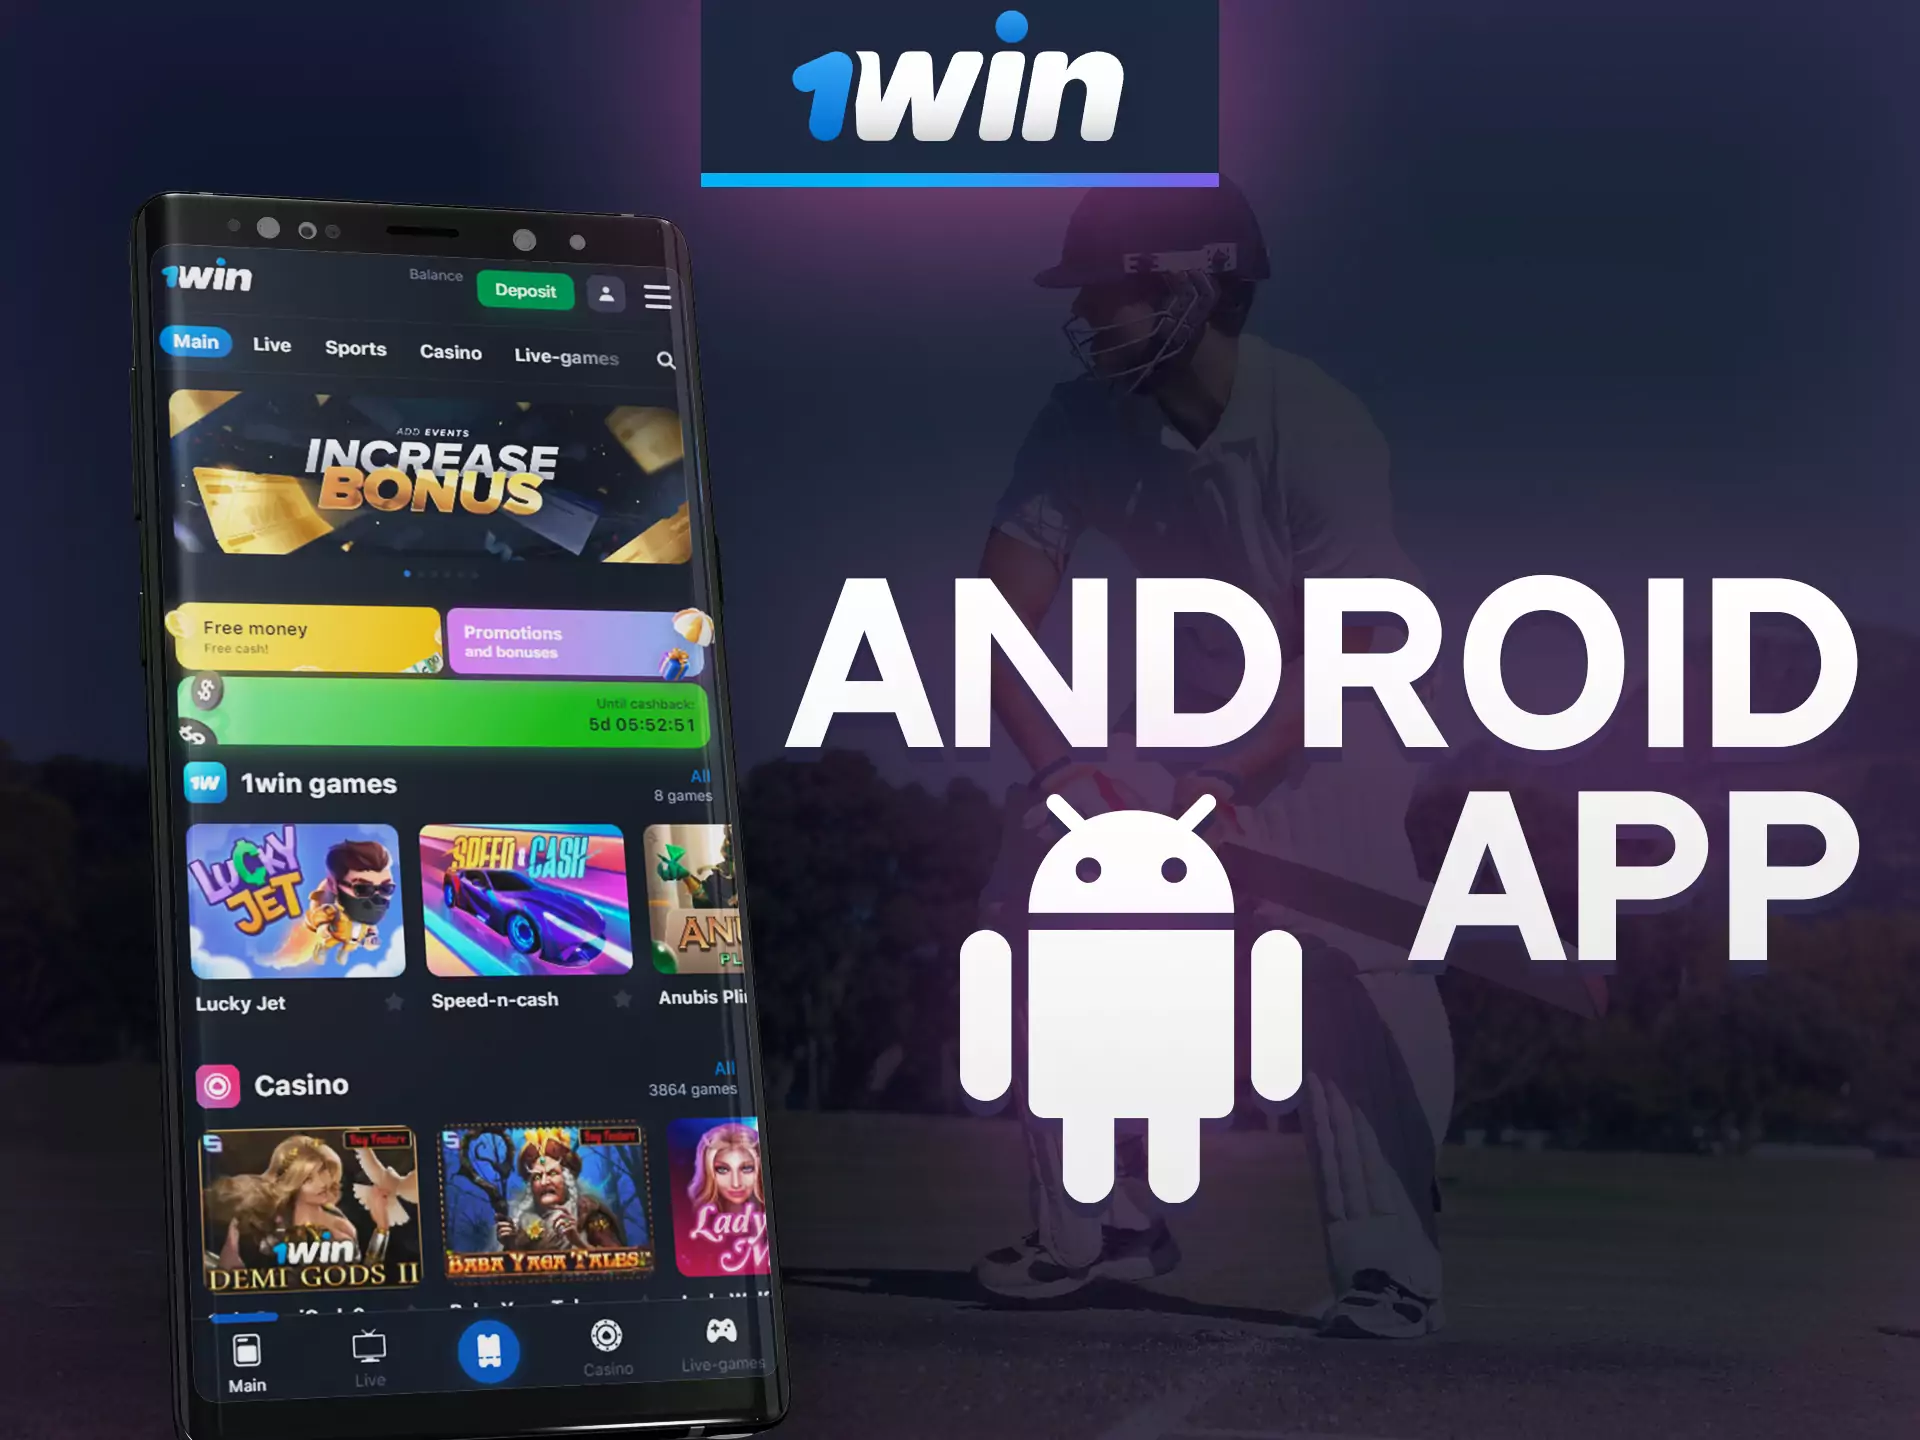 You can use 1win Android app in any place.